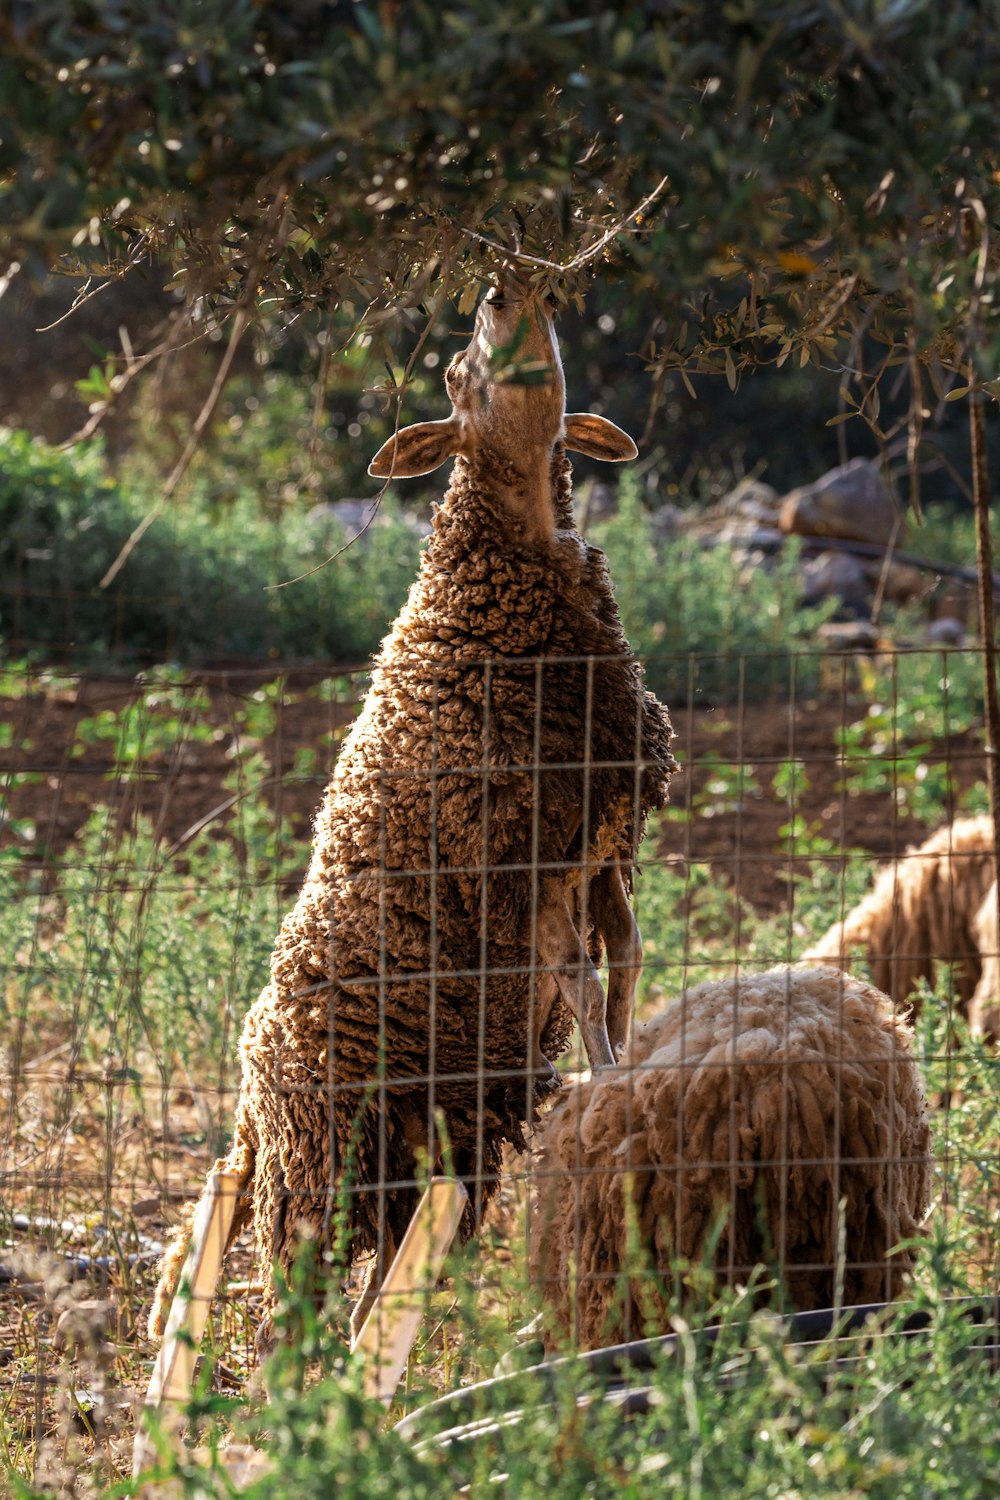 a sheep standing on its hind legs behind a wire fence